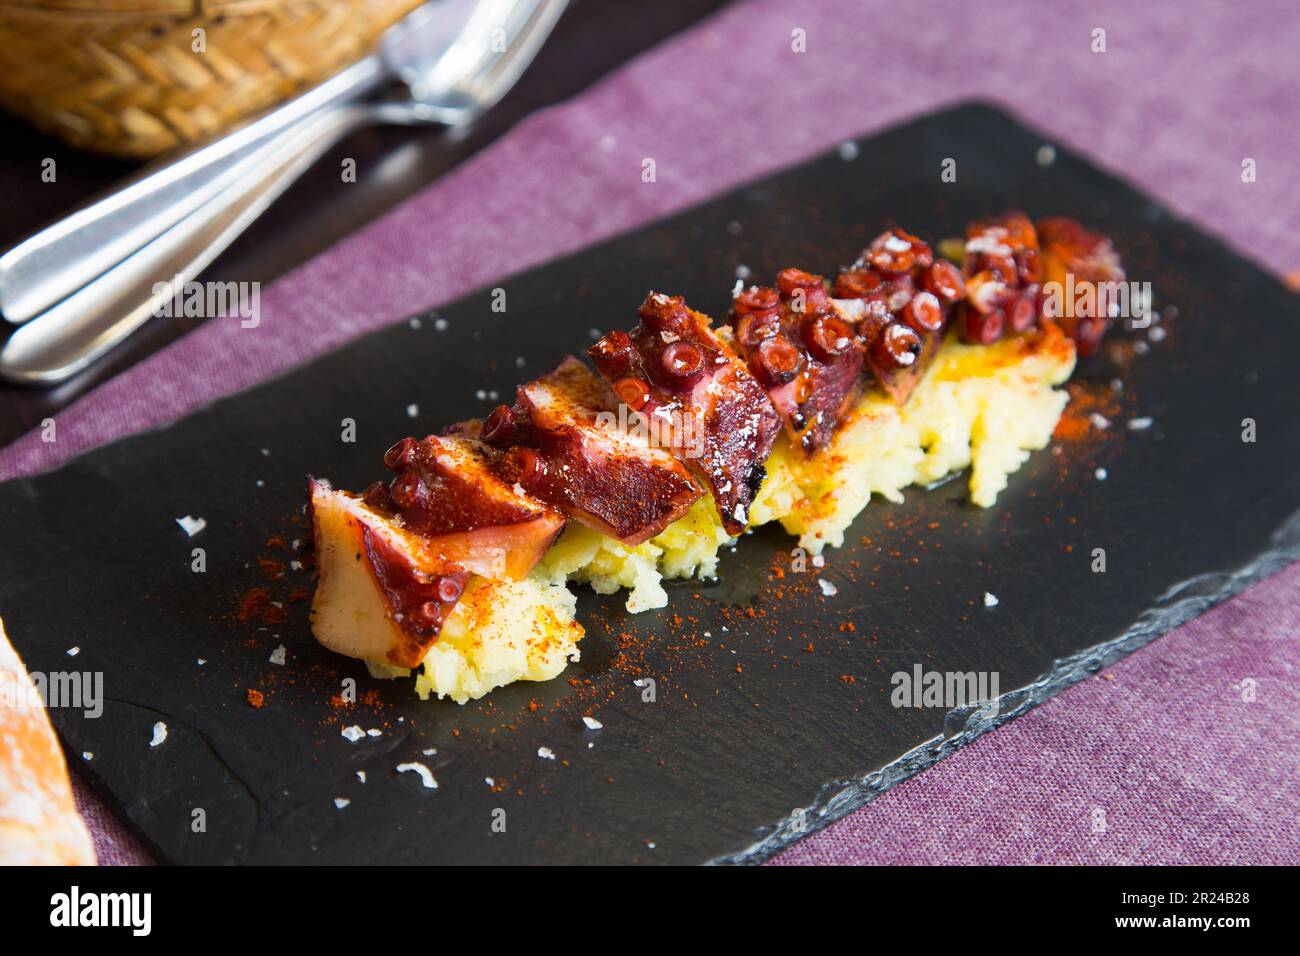 Pulpo a la Gallega. Octopus cooked with boiled potato, paprika and olive oil. Galician octopus recipe north of Spain tapa. Stock Photo